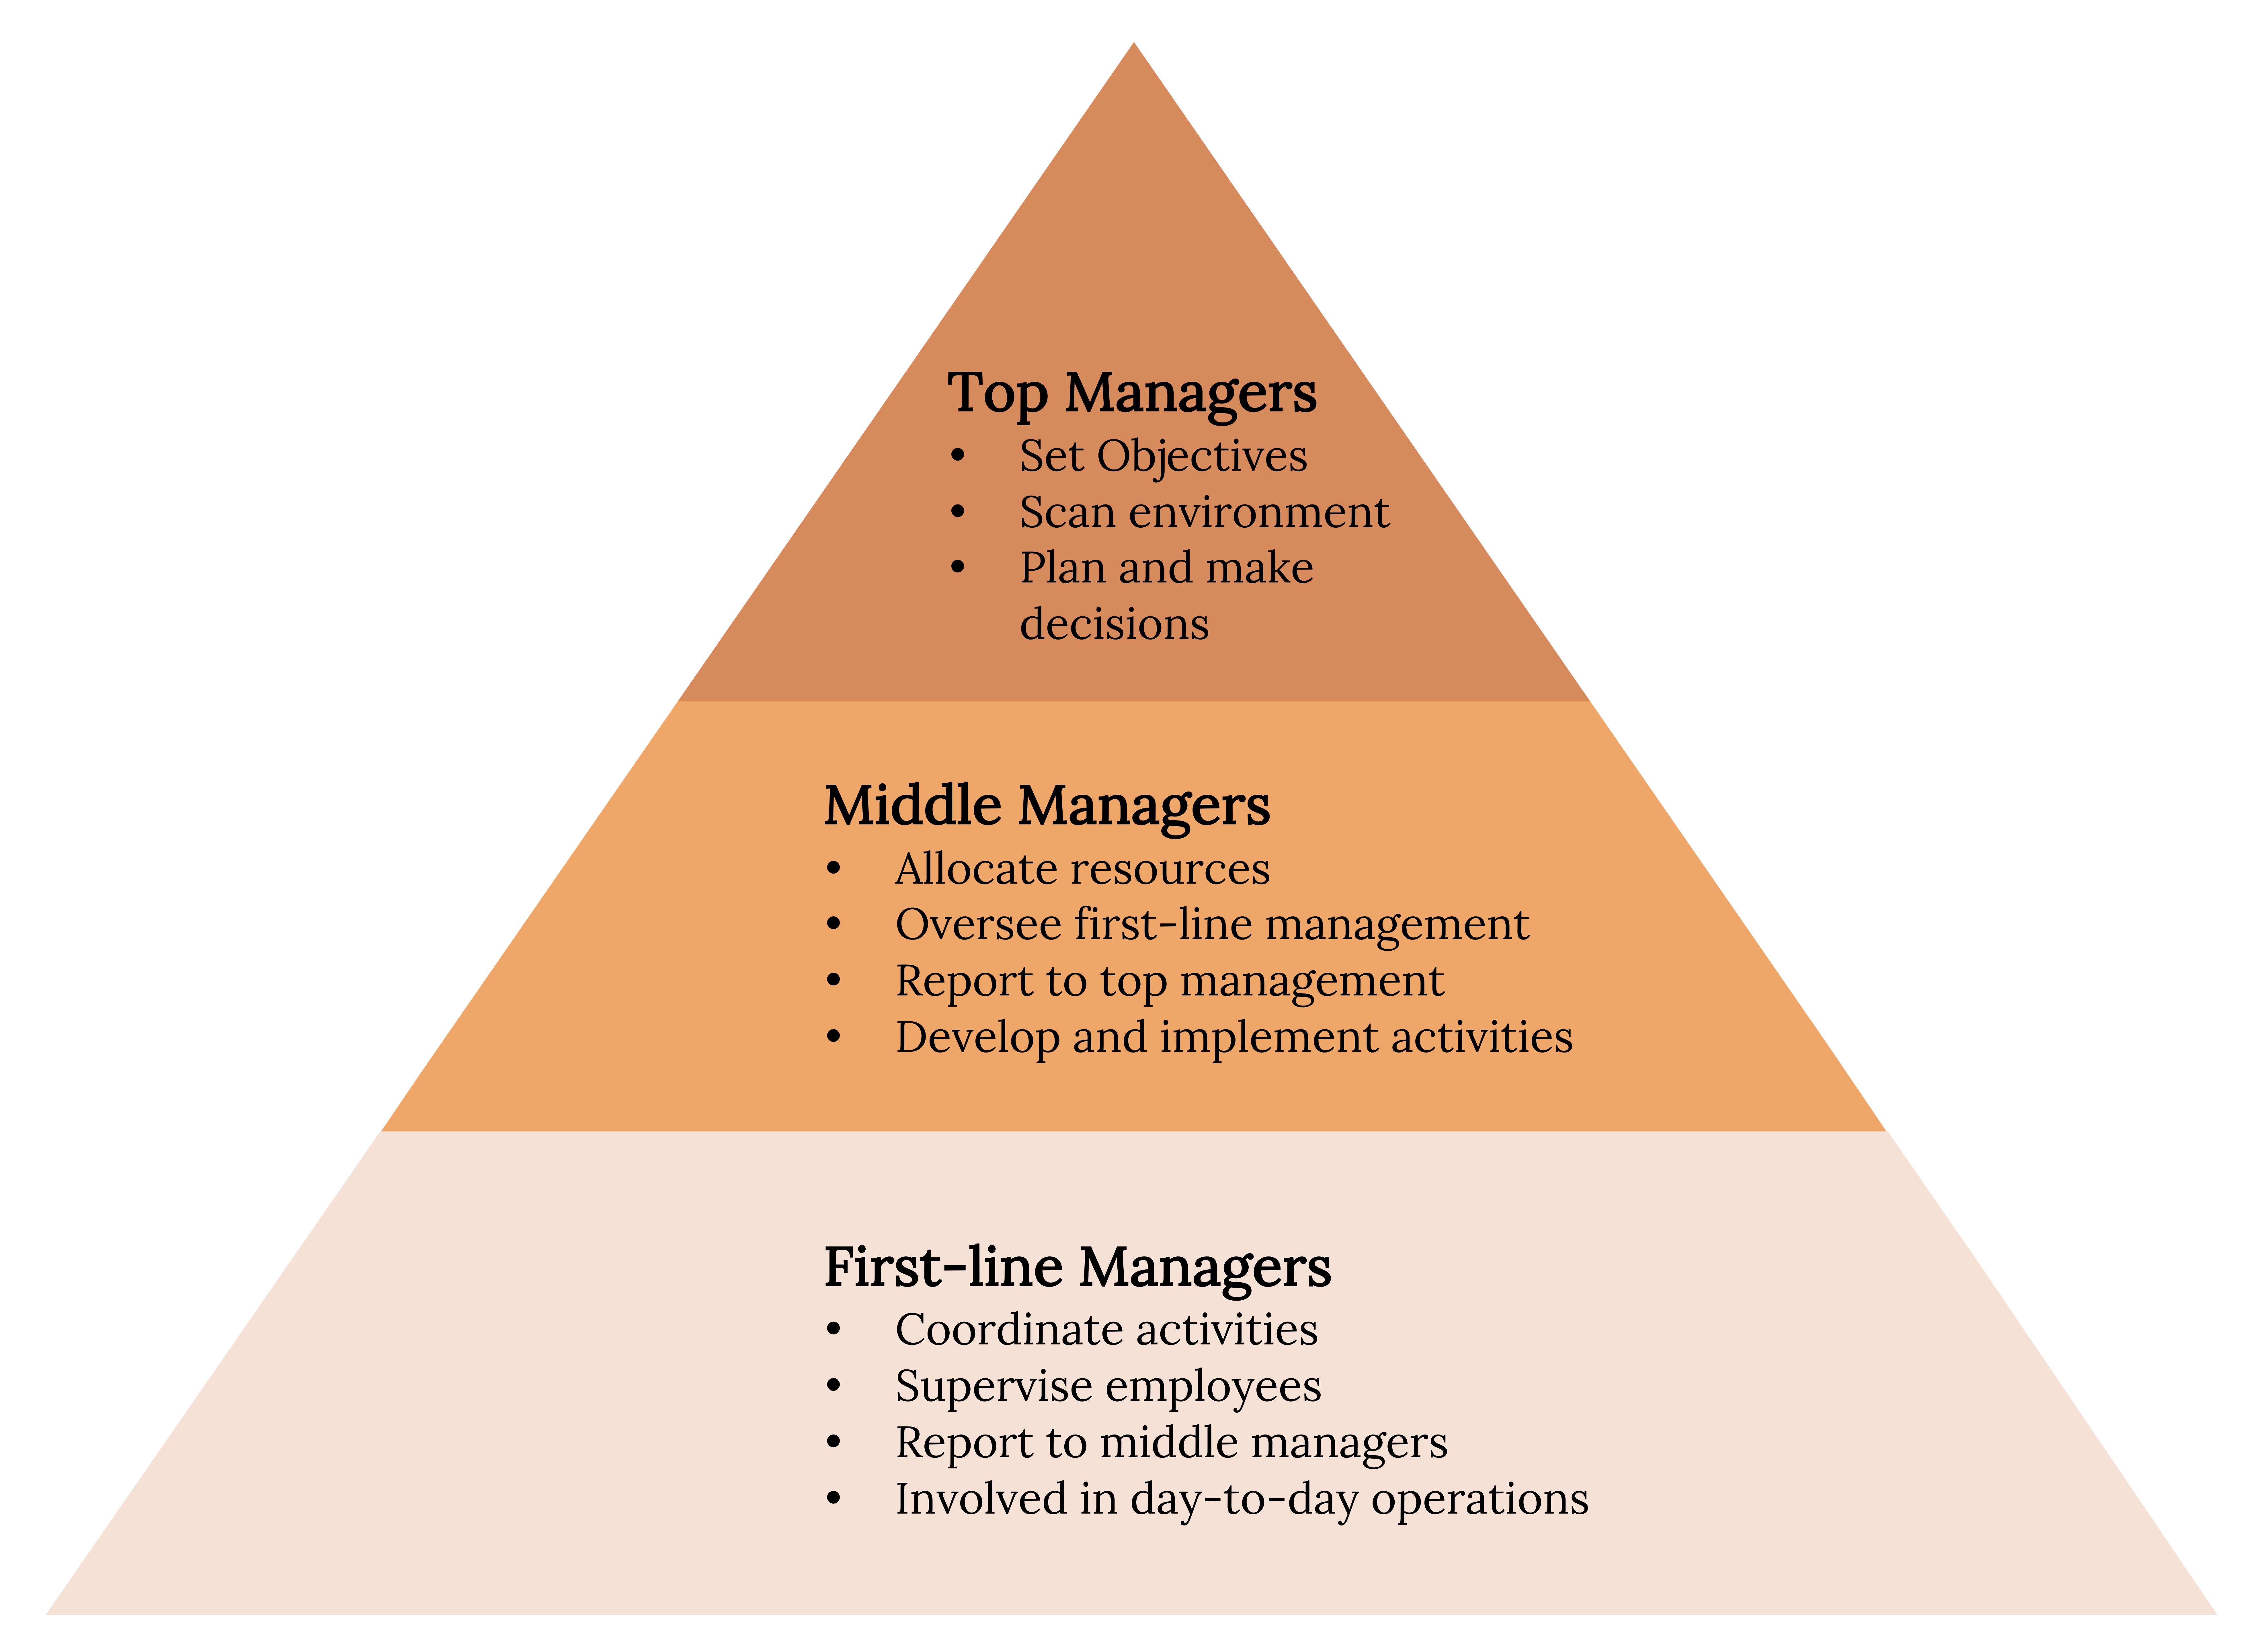 A pyramid diagram showing the three levels of management and tasks associated with the position in bullet points. At the bottom of the pyramid is the First-line Managers, with four bullet points: Coordinate activities; Supervise employees; Report to middle managers; Involved in day-to-day operations. The middle level of the pyramid is the Middle Managers, with four bullet points: Allocate resources; Oversee first-line managers; Report to top management; Develop and implement activities. The top level of the pyramid is the Top Managers, with three bullet points: Set objectives; Scan environment; Plan and make decisions.